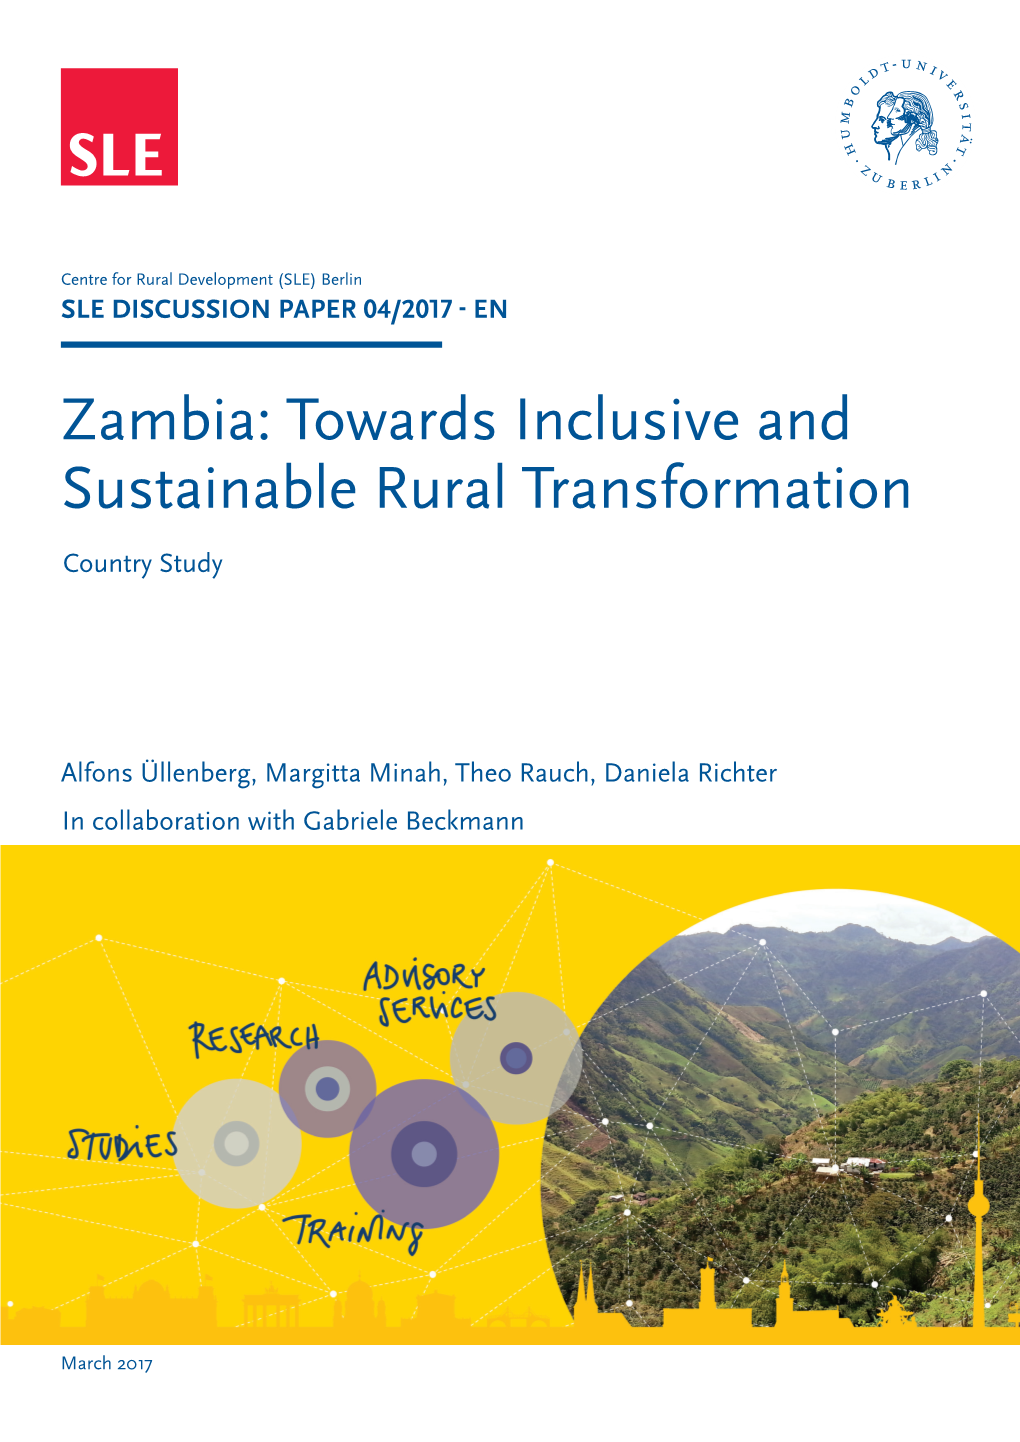 Zambia: Towards Inclusive and Sustainable Rural Transformation